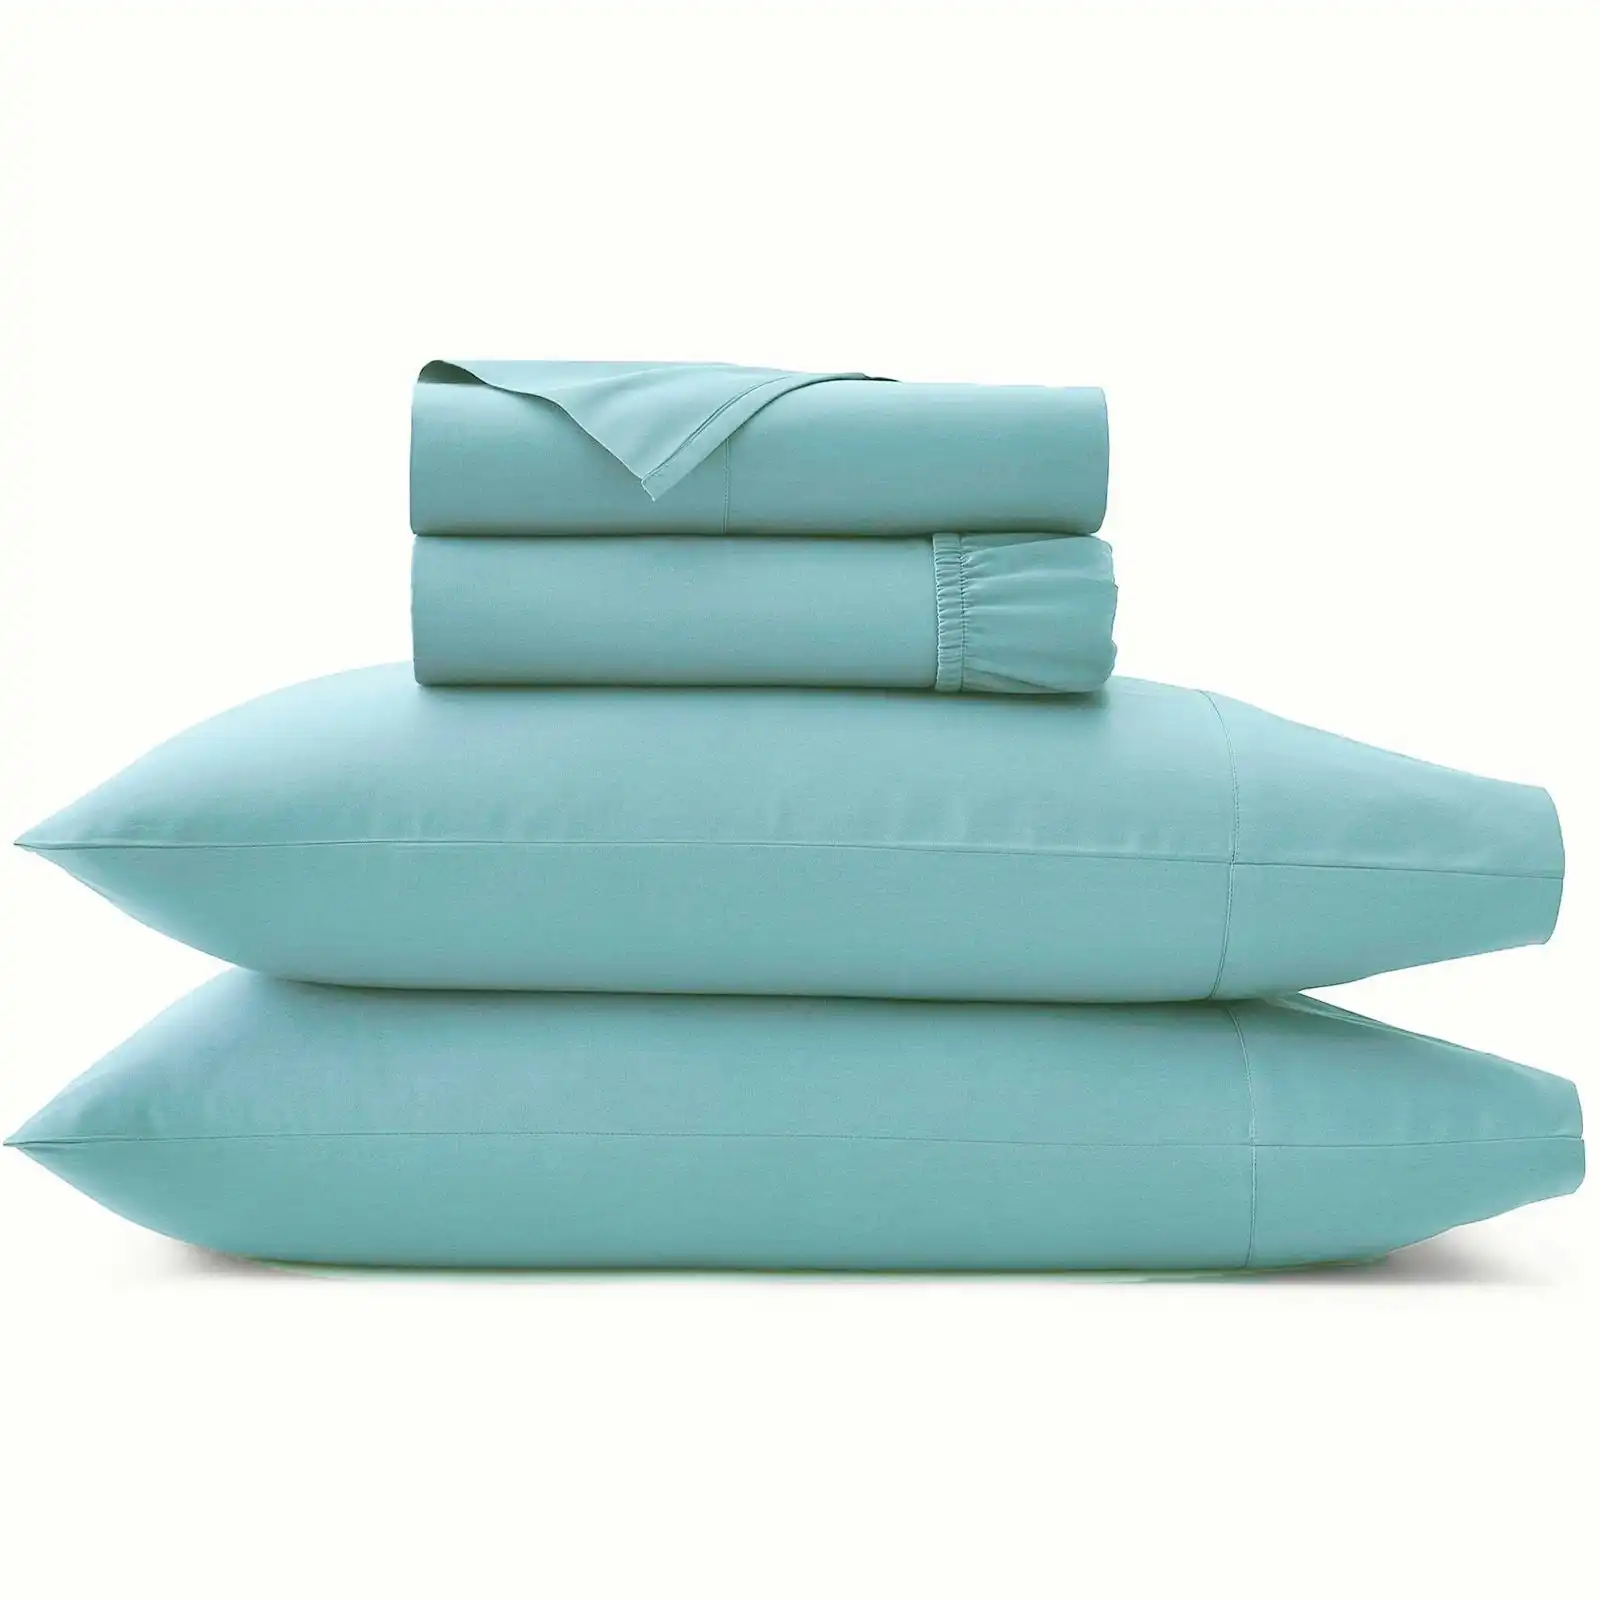 Cotton Natural 500 Thread Count Sheet Set Turquoise